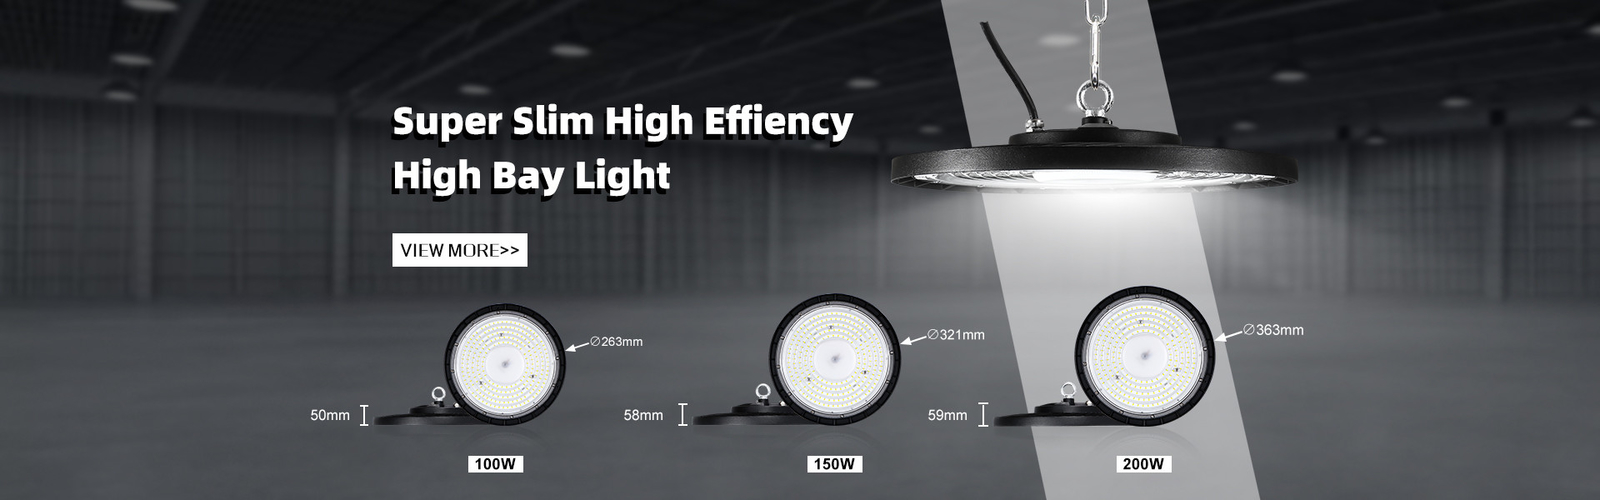 quality Solar Powered LED Street Lights factory